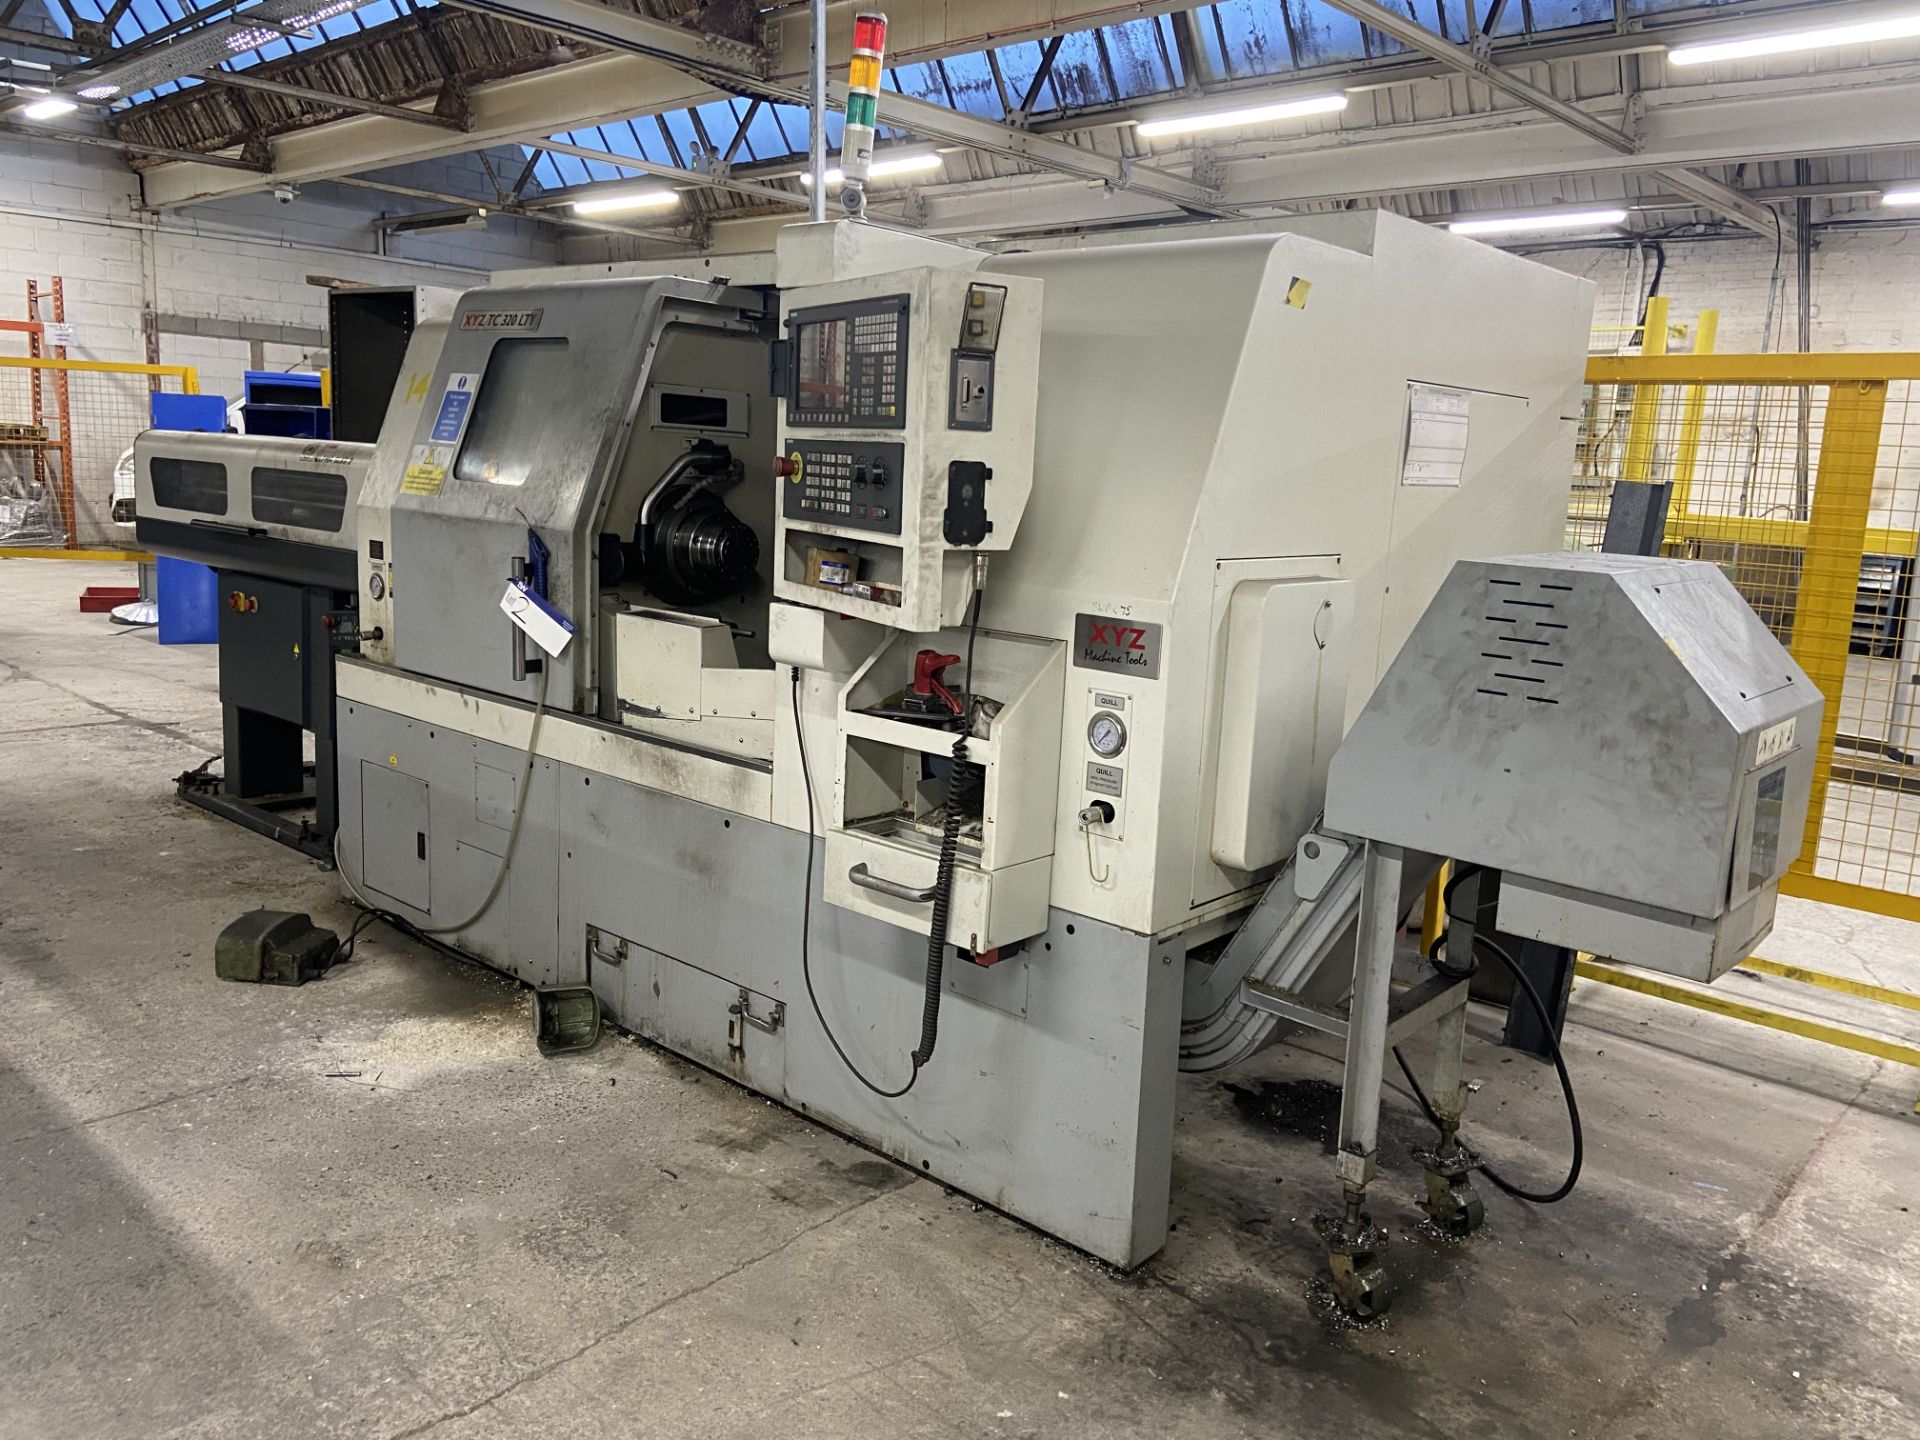 XYZ 320 LTY BAR FEED CNC LATHE, serial no. STN10133, year of manufacture 2013, with LNS A SL65S